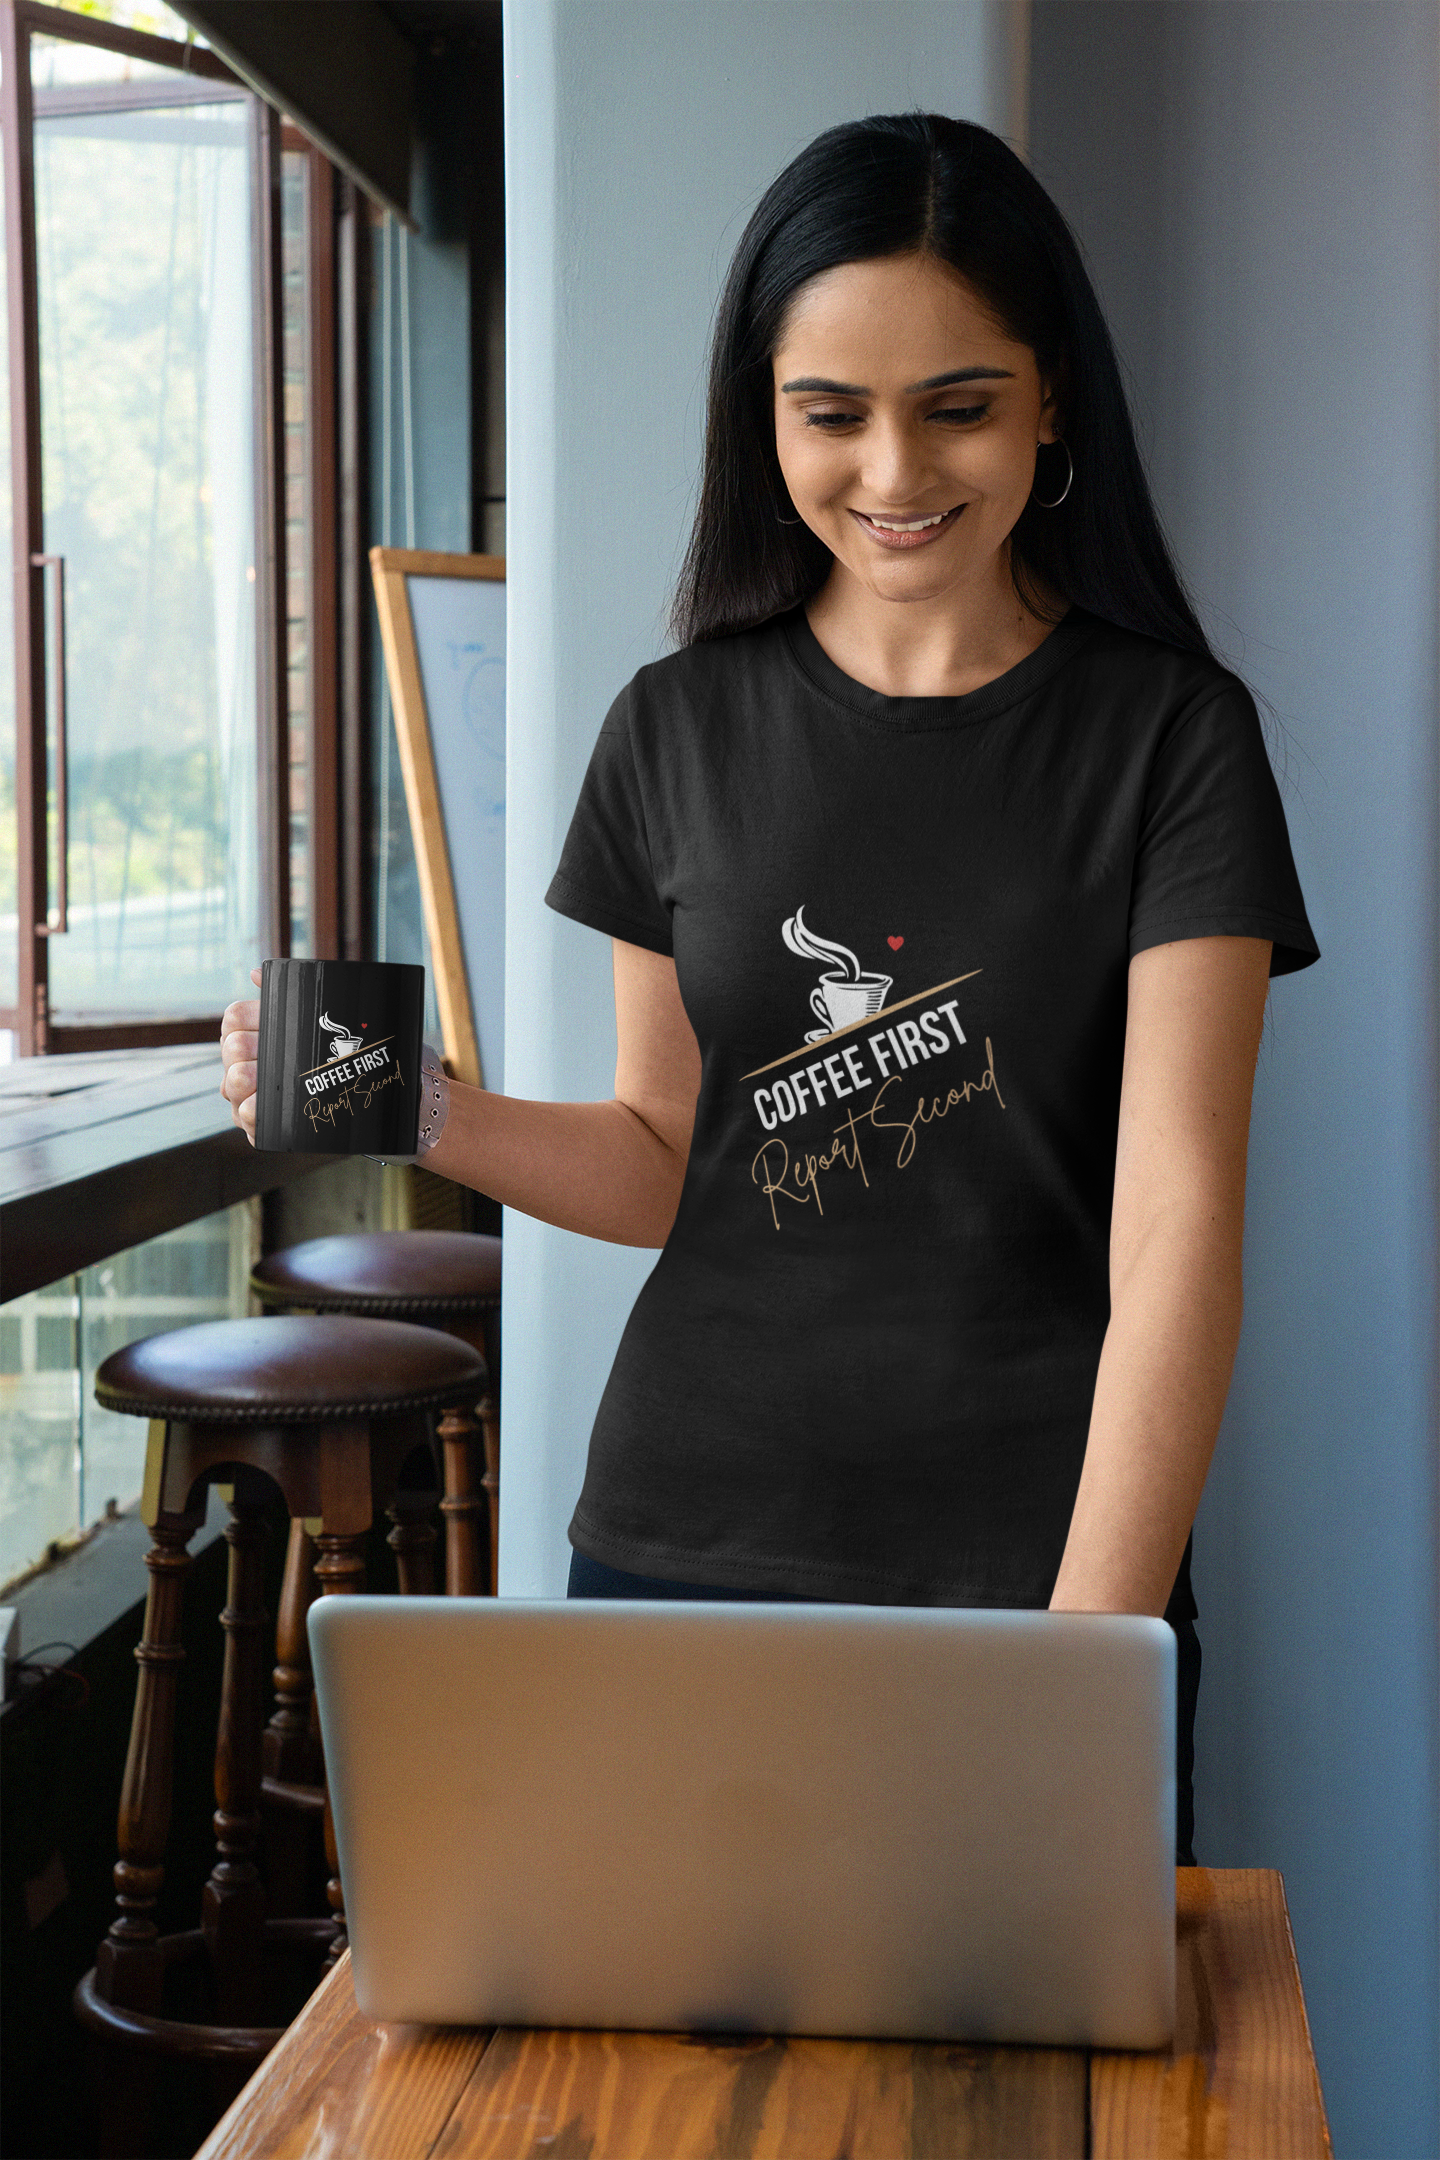 Funny Black short sleeve t shirt that reads "Coffee first, report second"